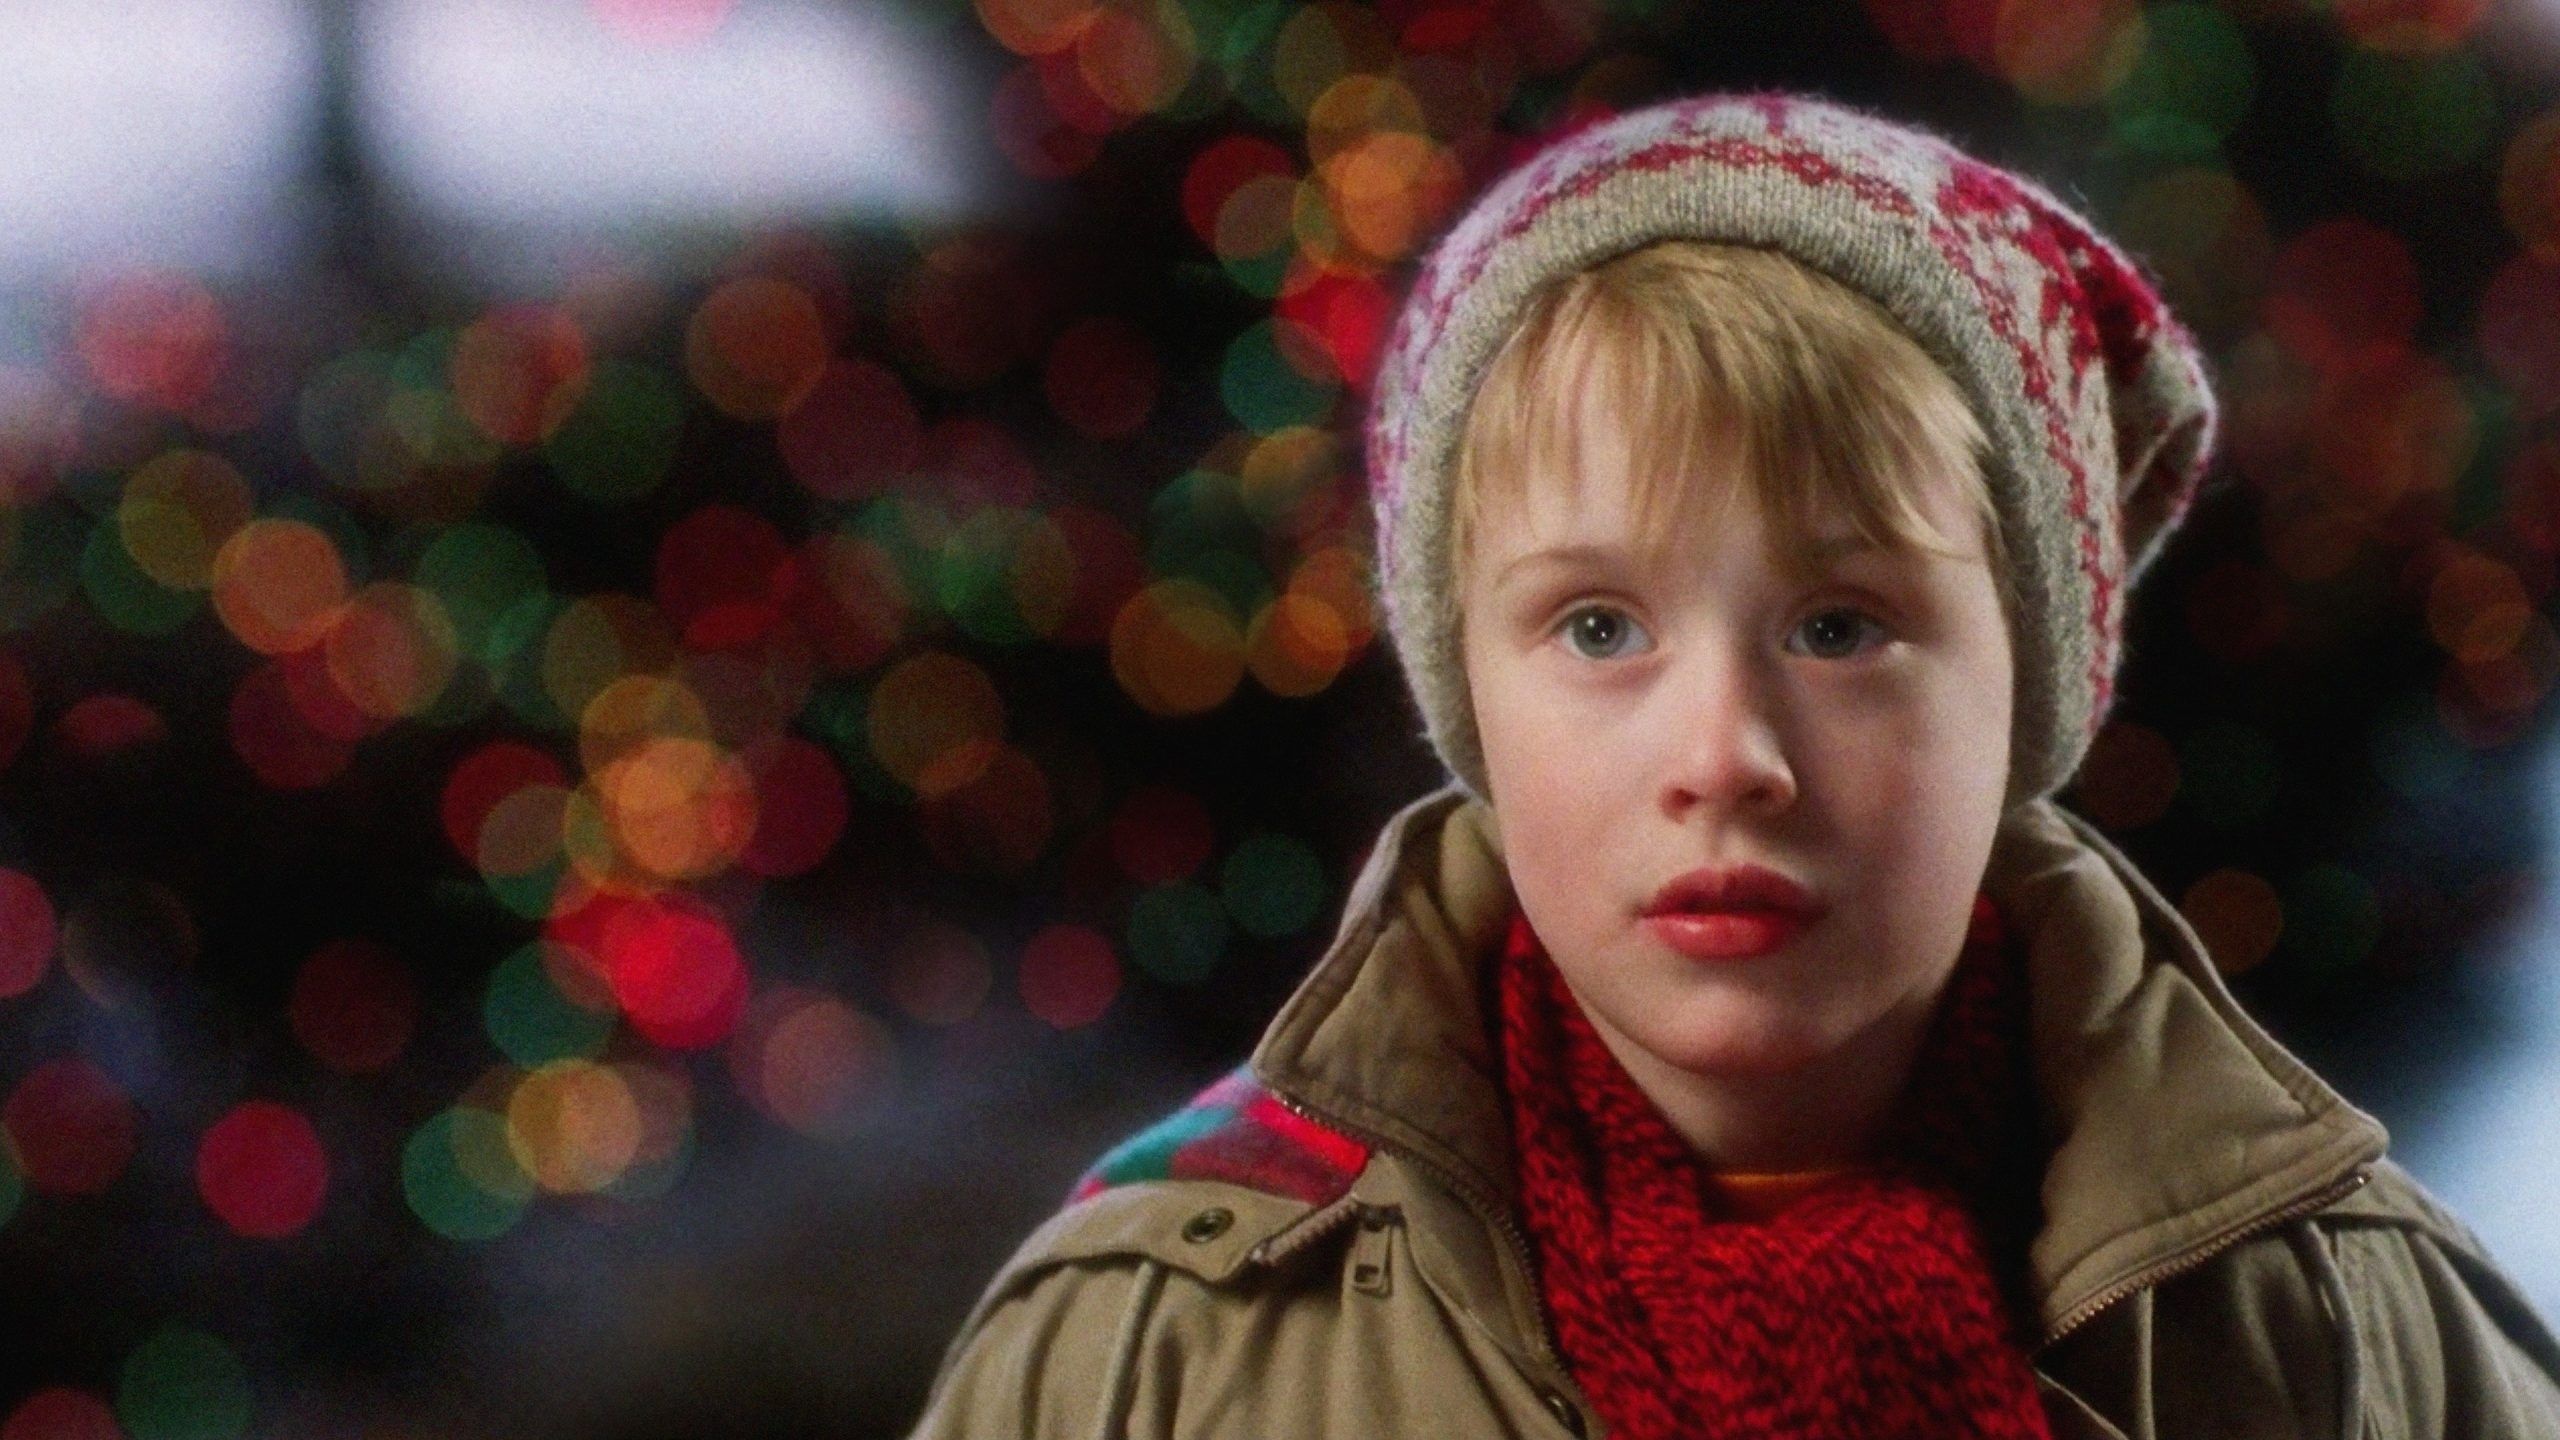 Home Alone 2, Christmas movie collection, Festive film selection, Holiday entertainment, 2560x1440 HD Desktop